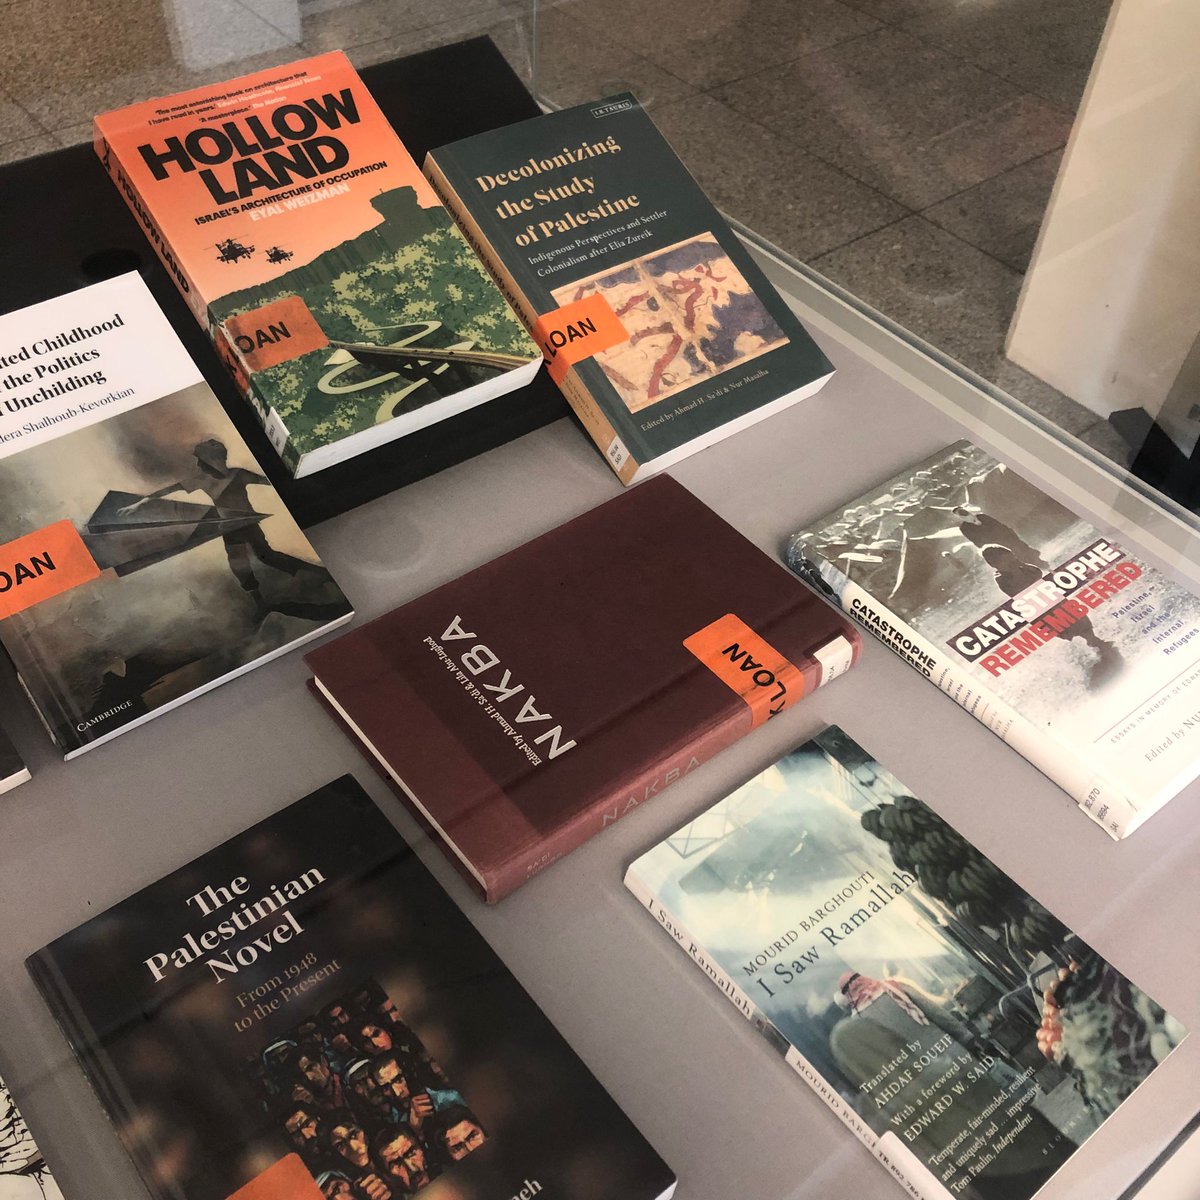 This week we’re highlighting a selection of books from our collection related to Palestine, on display now in the @library_MU foyer! @MaynoothEnglish